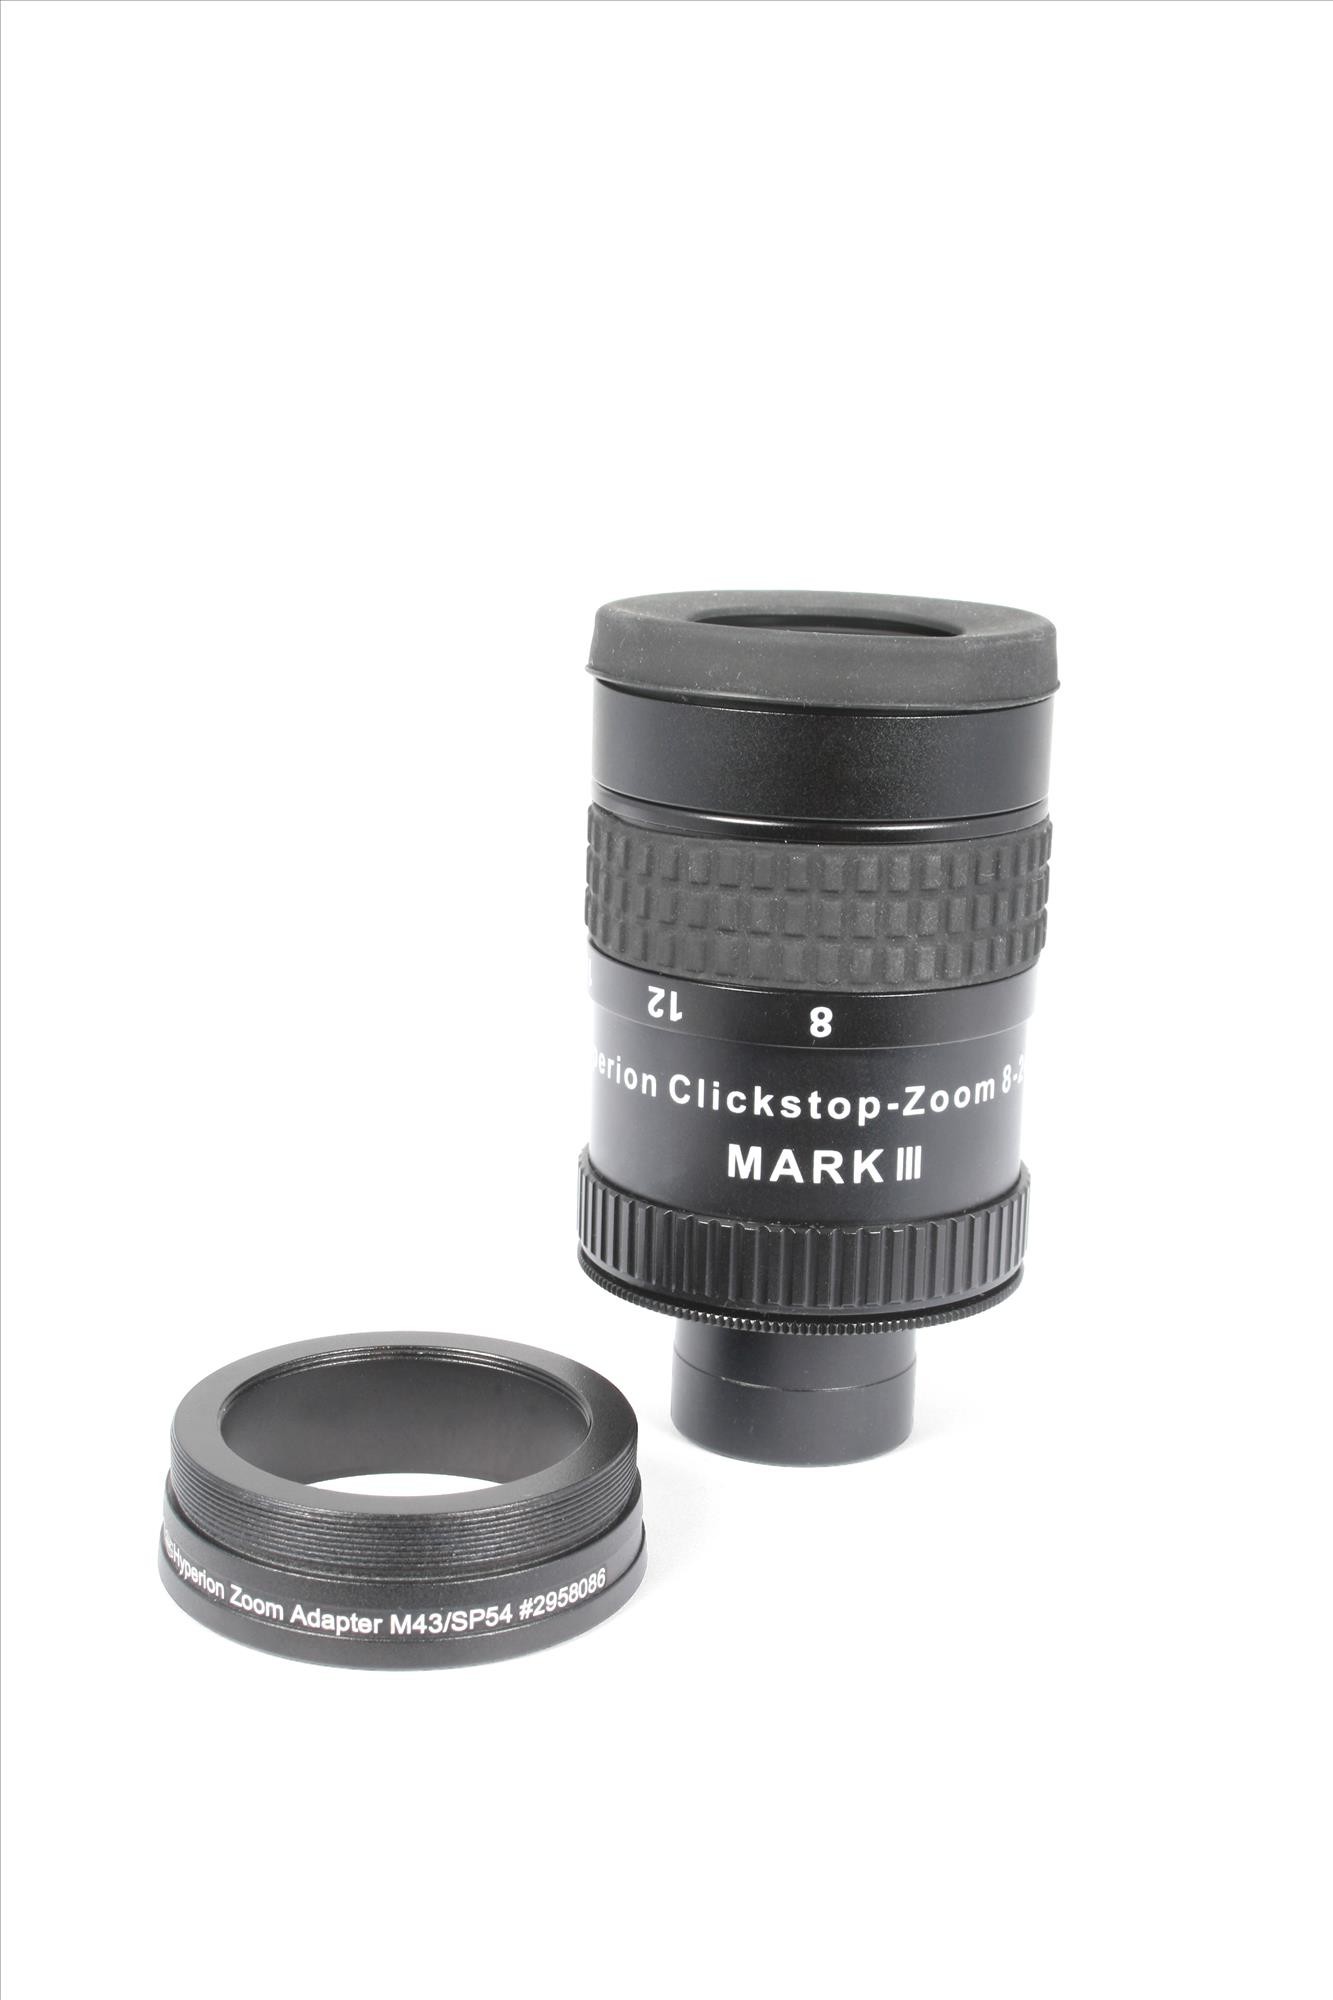 Application Image: Shows discontinued Mark III Zoom, works also with Mark IV Zoom